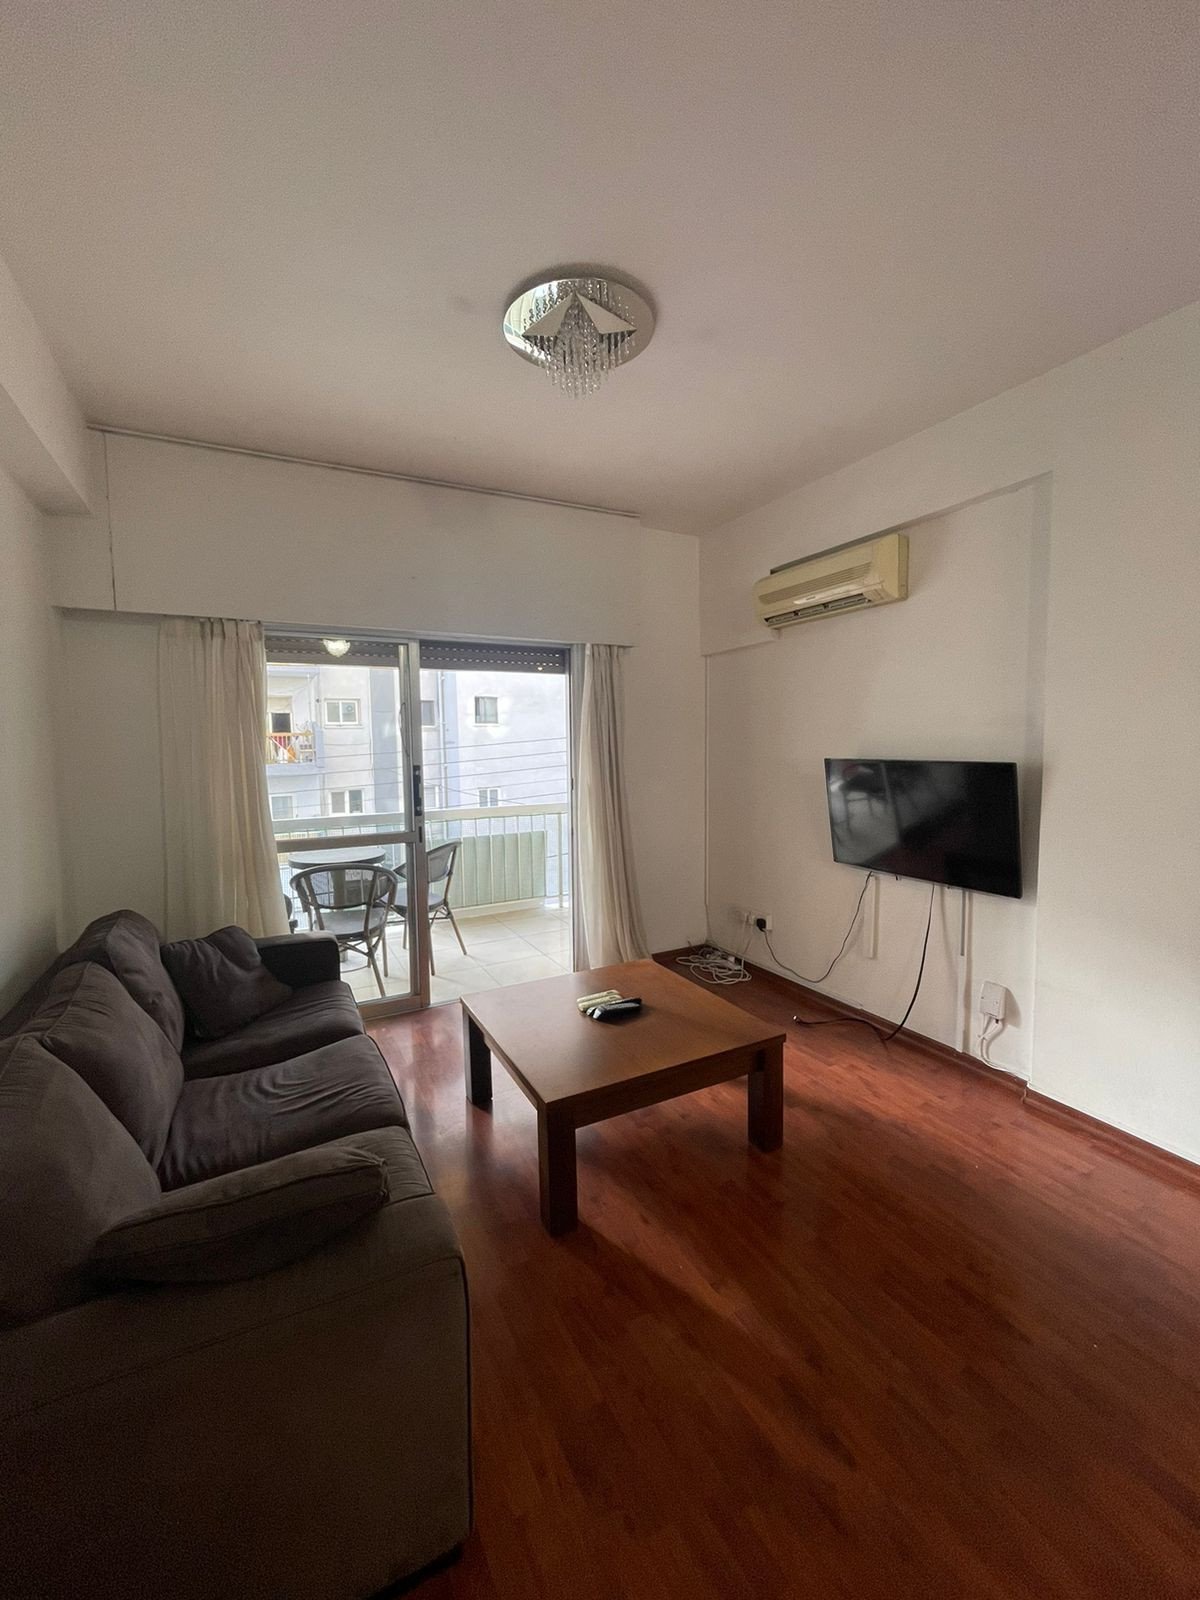 Property for Sale: Apartment (Flat) in Neapoli, Limassol  | Key Realtor Cyprus